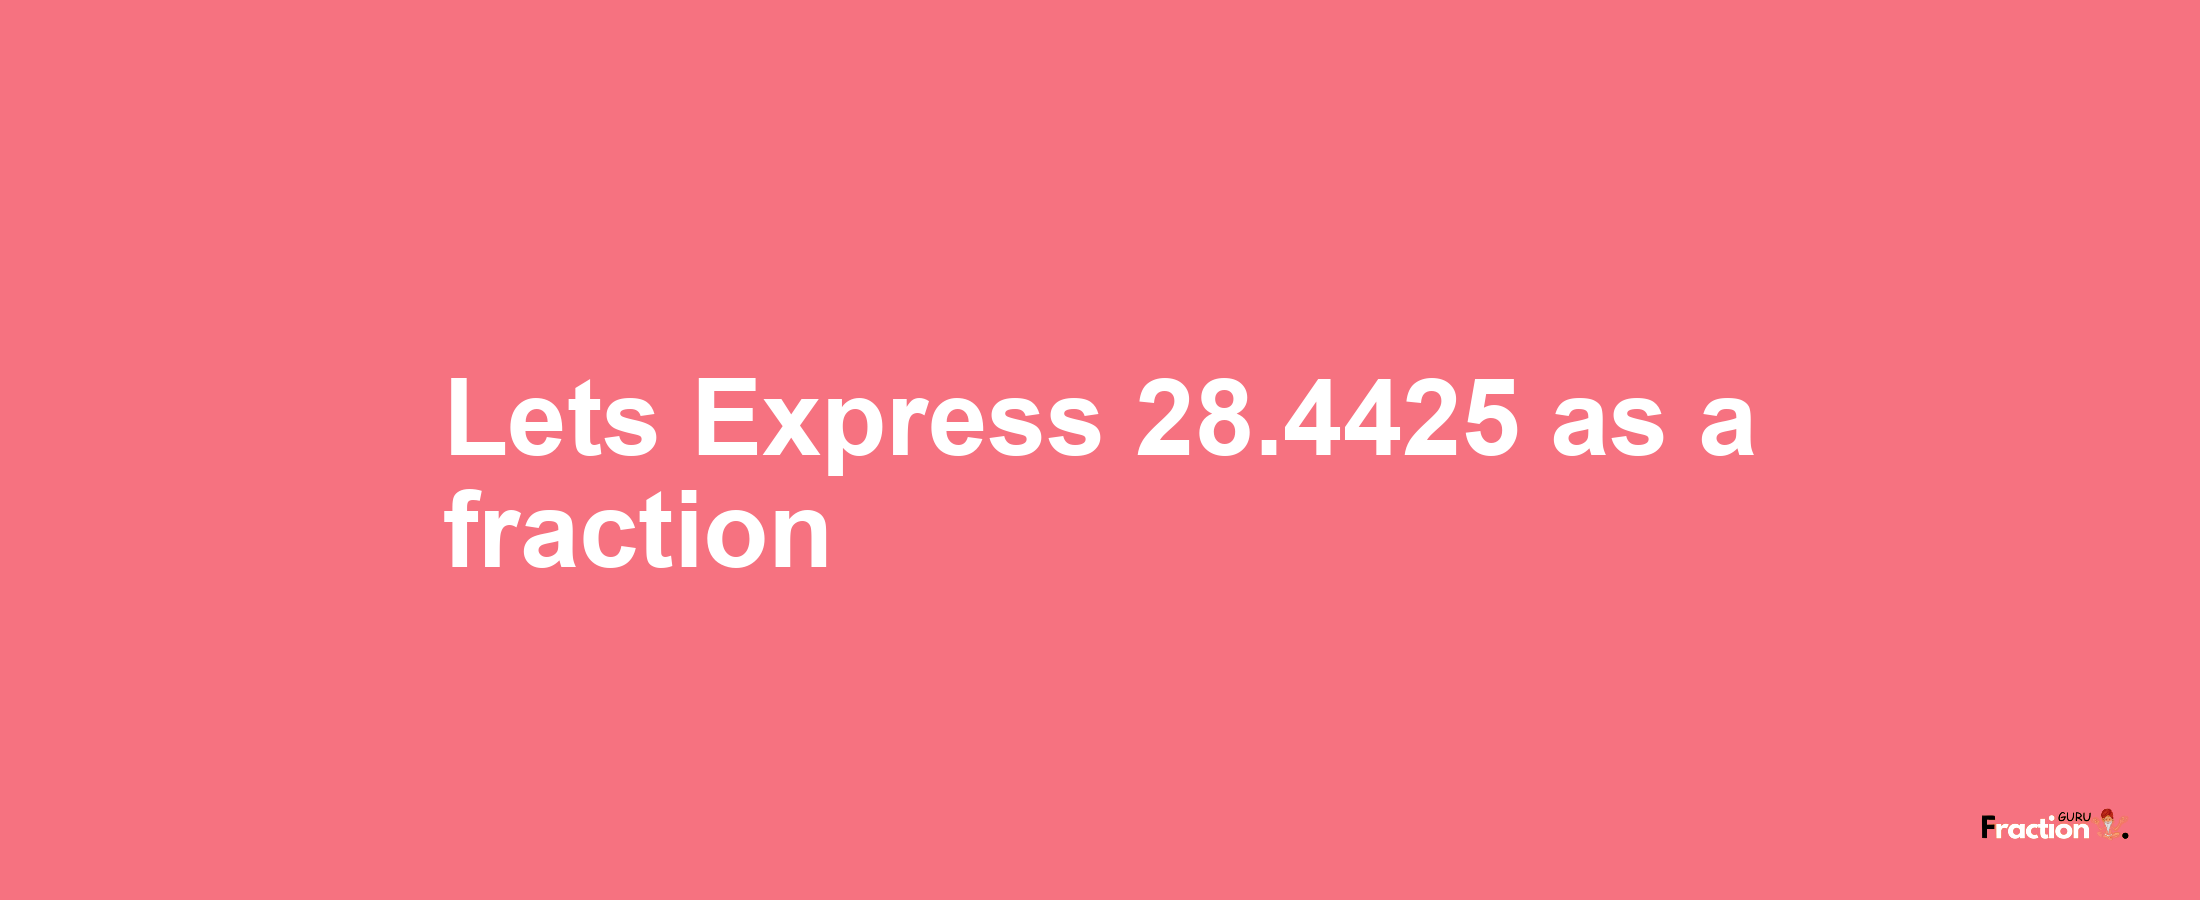 Lets Express 28.4425 as afraction